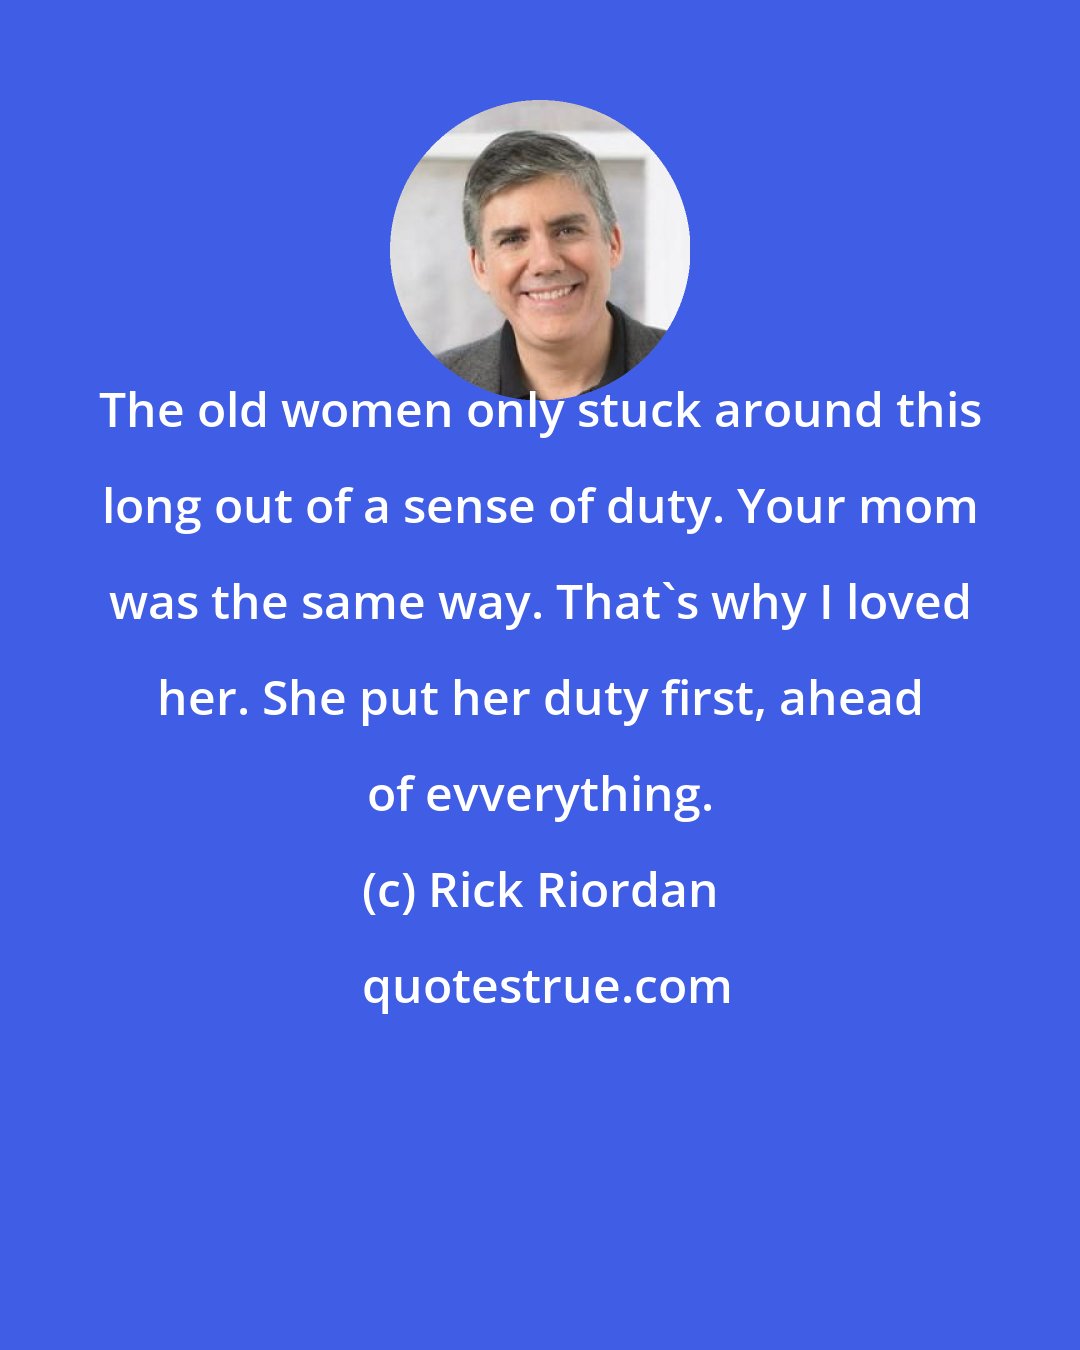 Rick Riordan: The old women only stuck around this long out of a sense of duty. Your mom was the same way. That's why I loved her. She put her duty first, ahead of evverything.